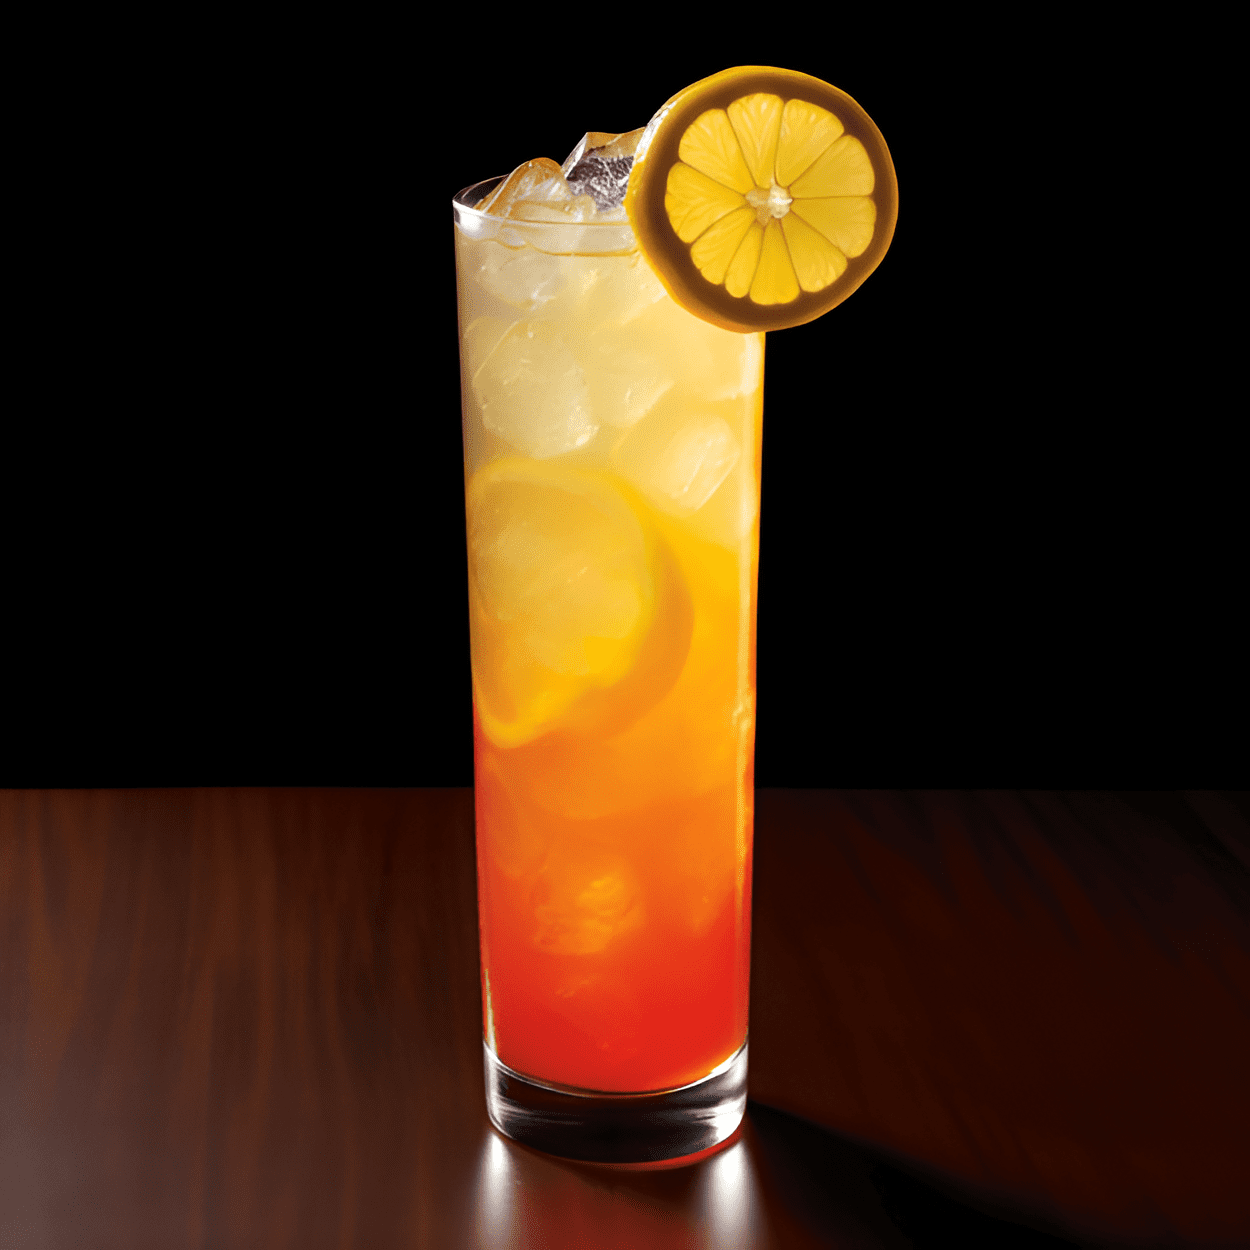 Boat Cocktail Recipe - The Boat Cocktail has a refreshing, fruity, and slightly sweet taste. It's well-balanced with a hint of tartness from the lemon juice, and the sweetness from the sugar syrup and fruit juices.